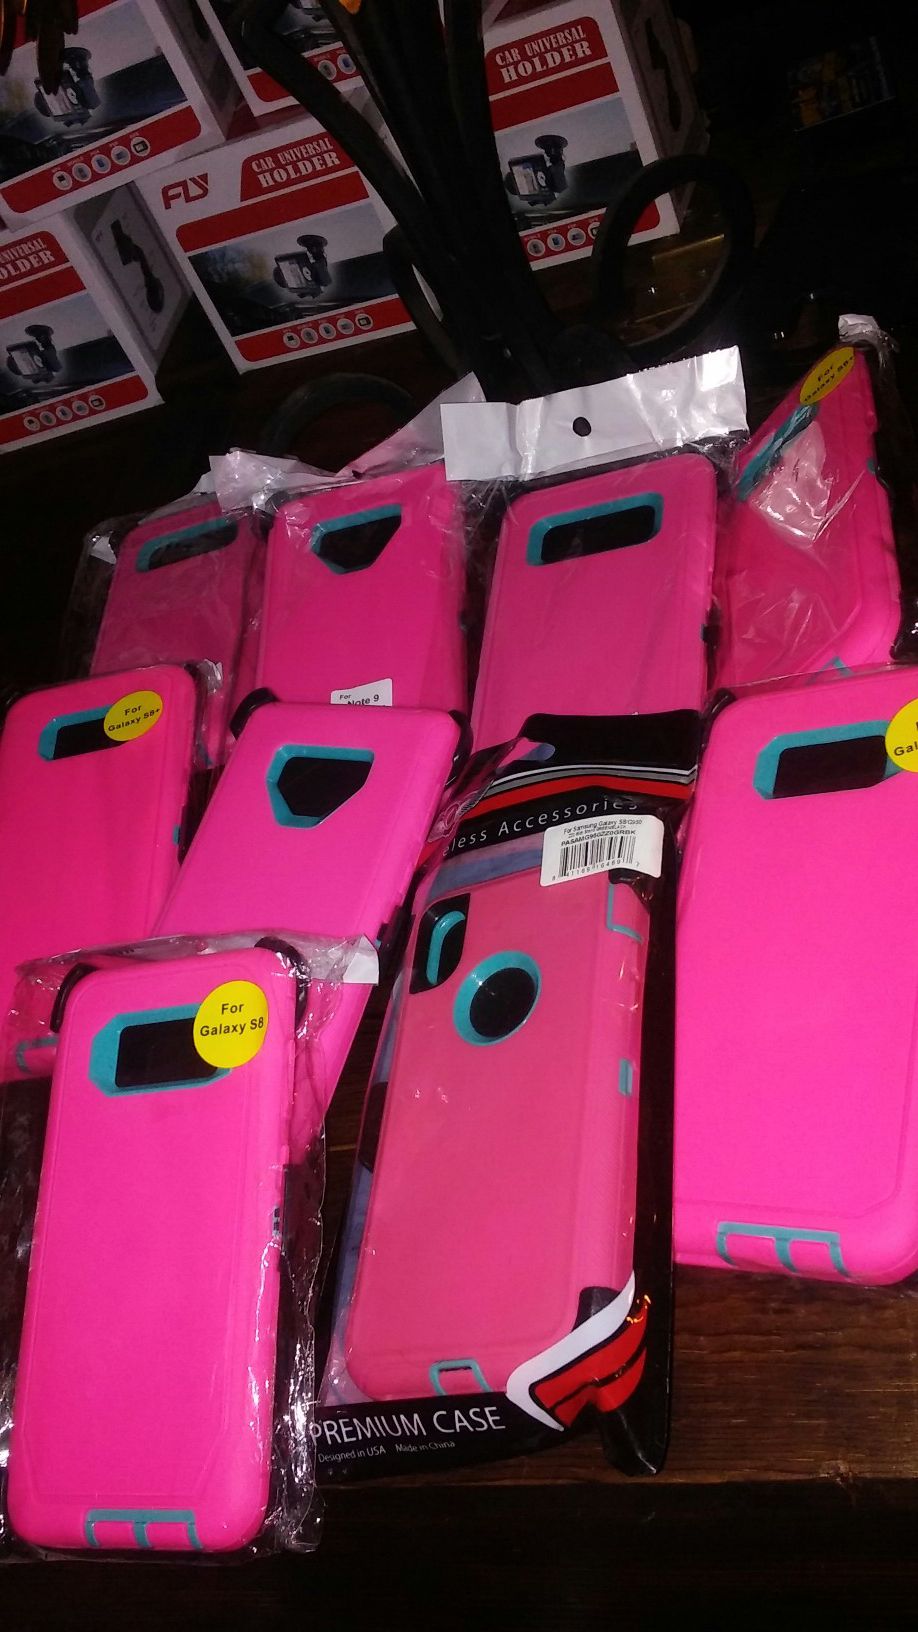 Otterbox Style Cases For Samsungs And Iphones!